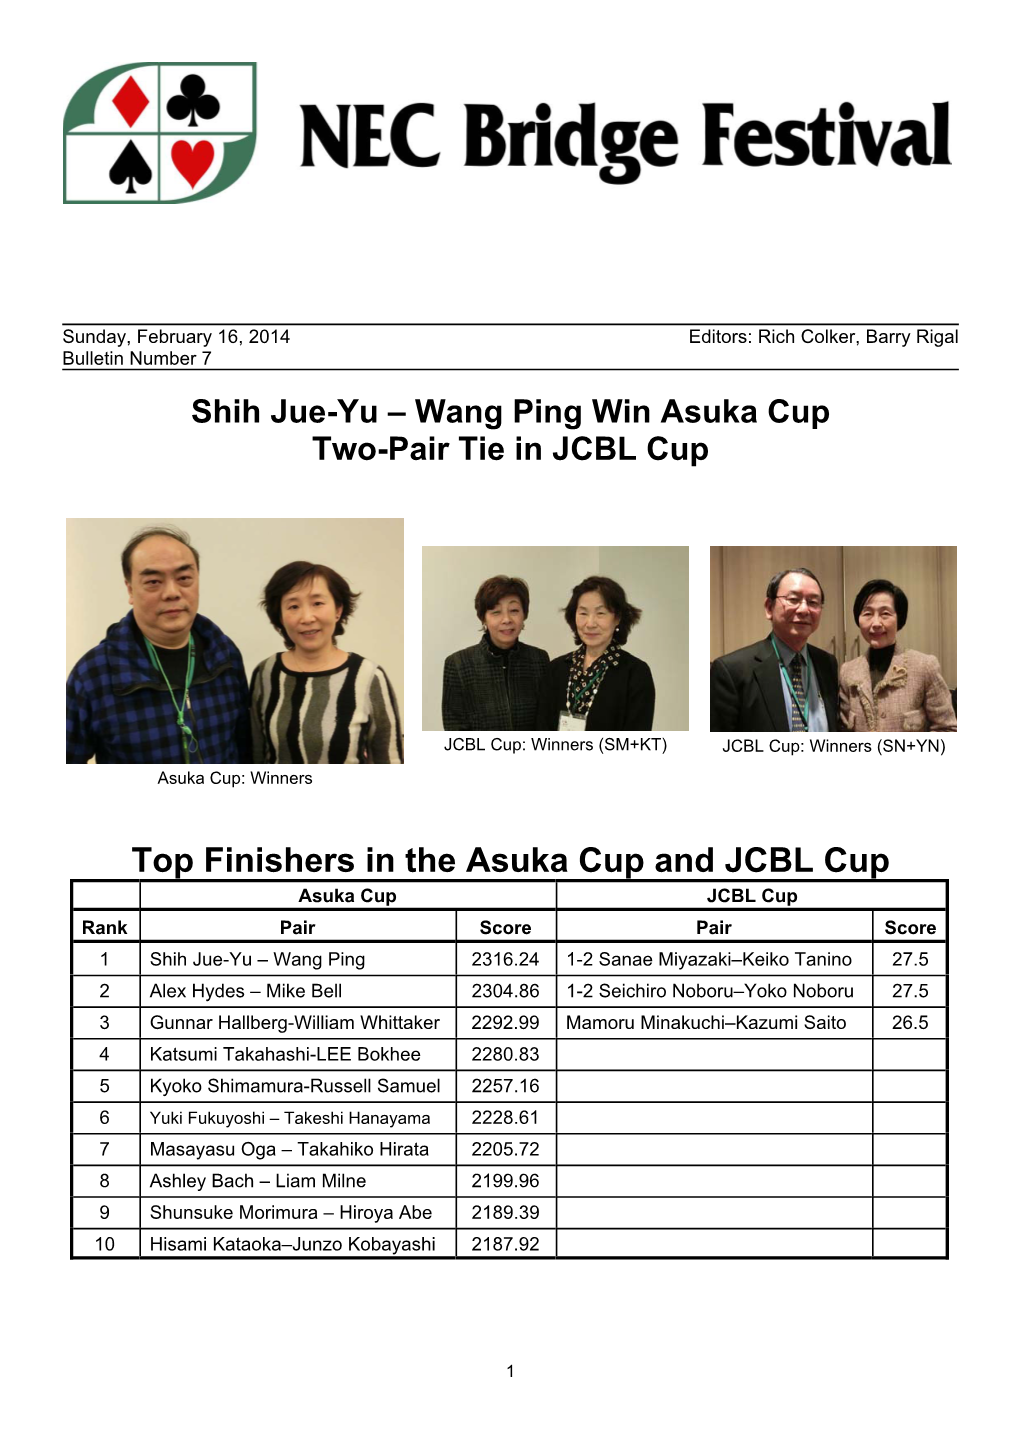 Top Finishers in the Asuka Cup and JCBL